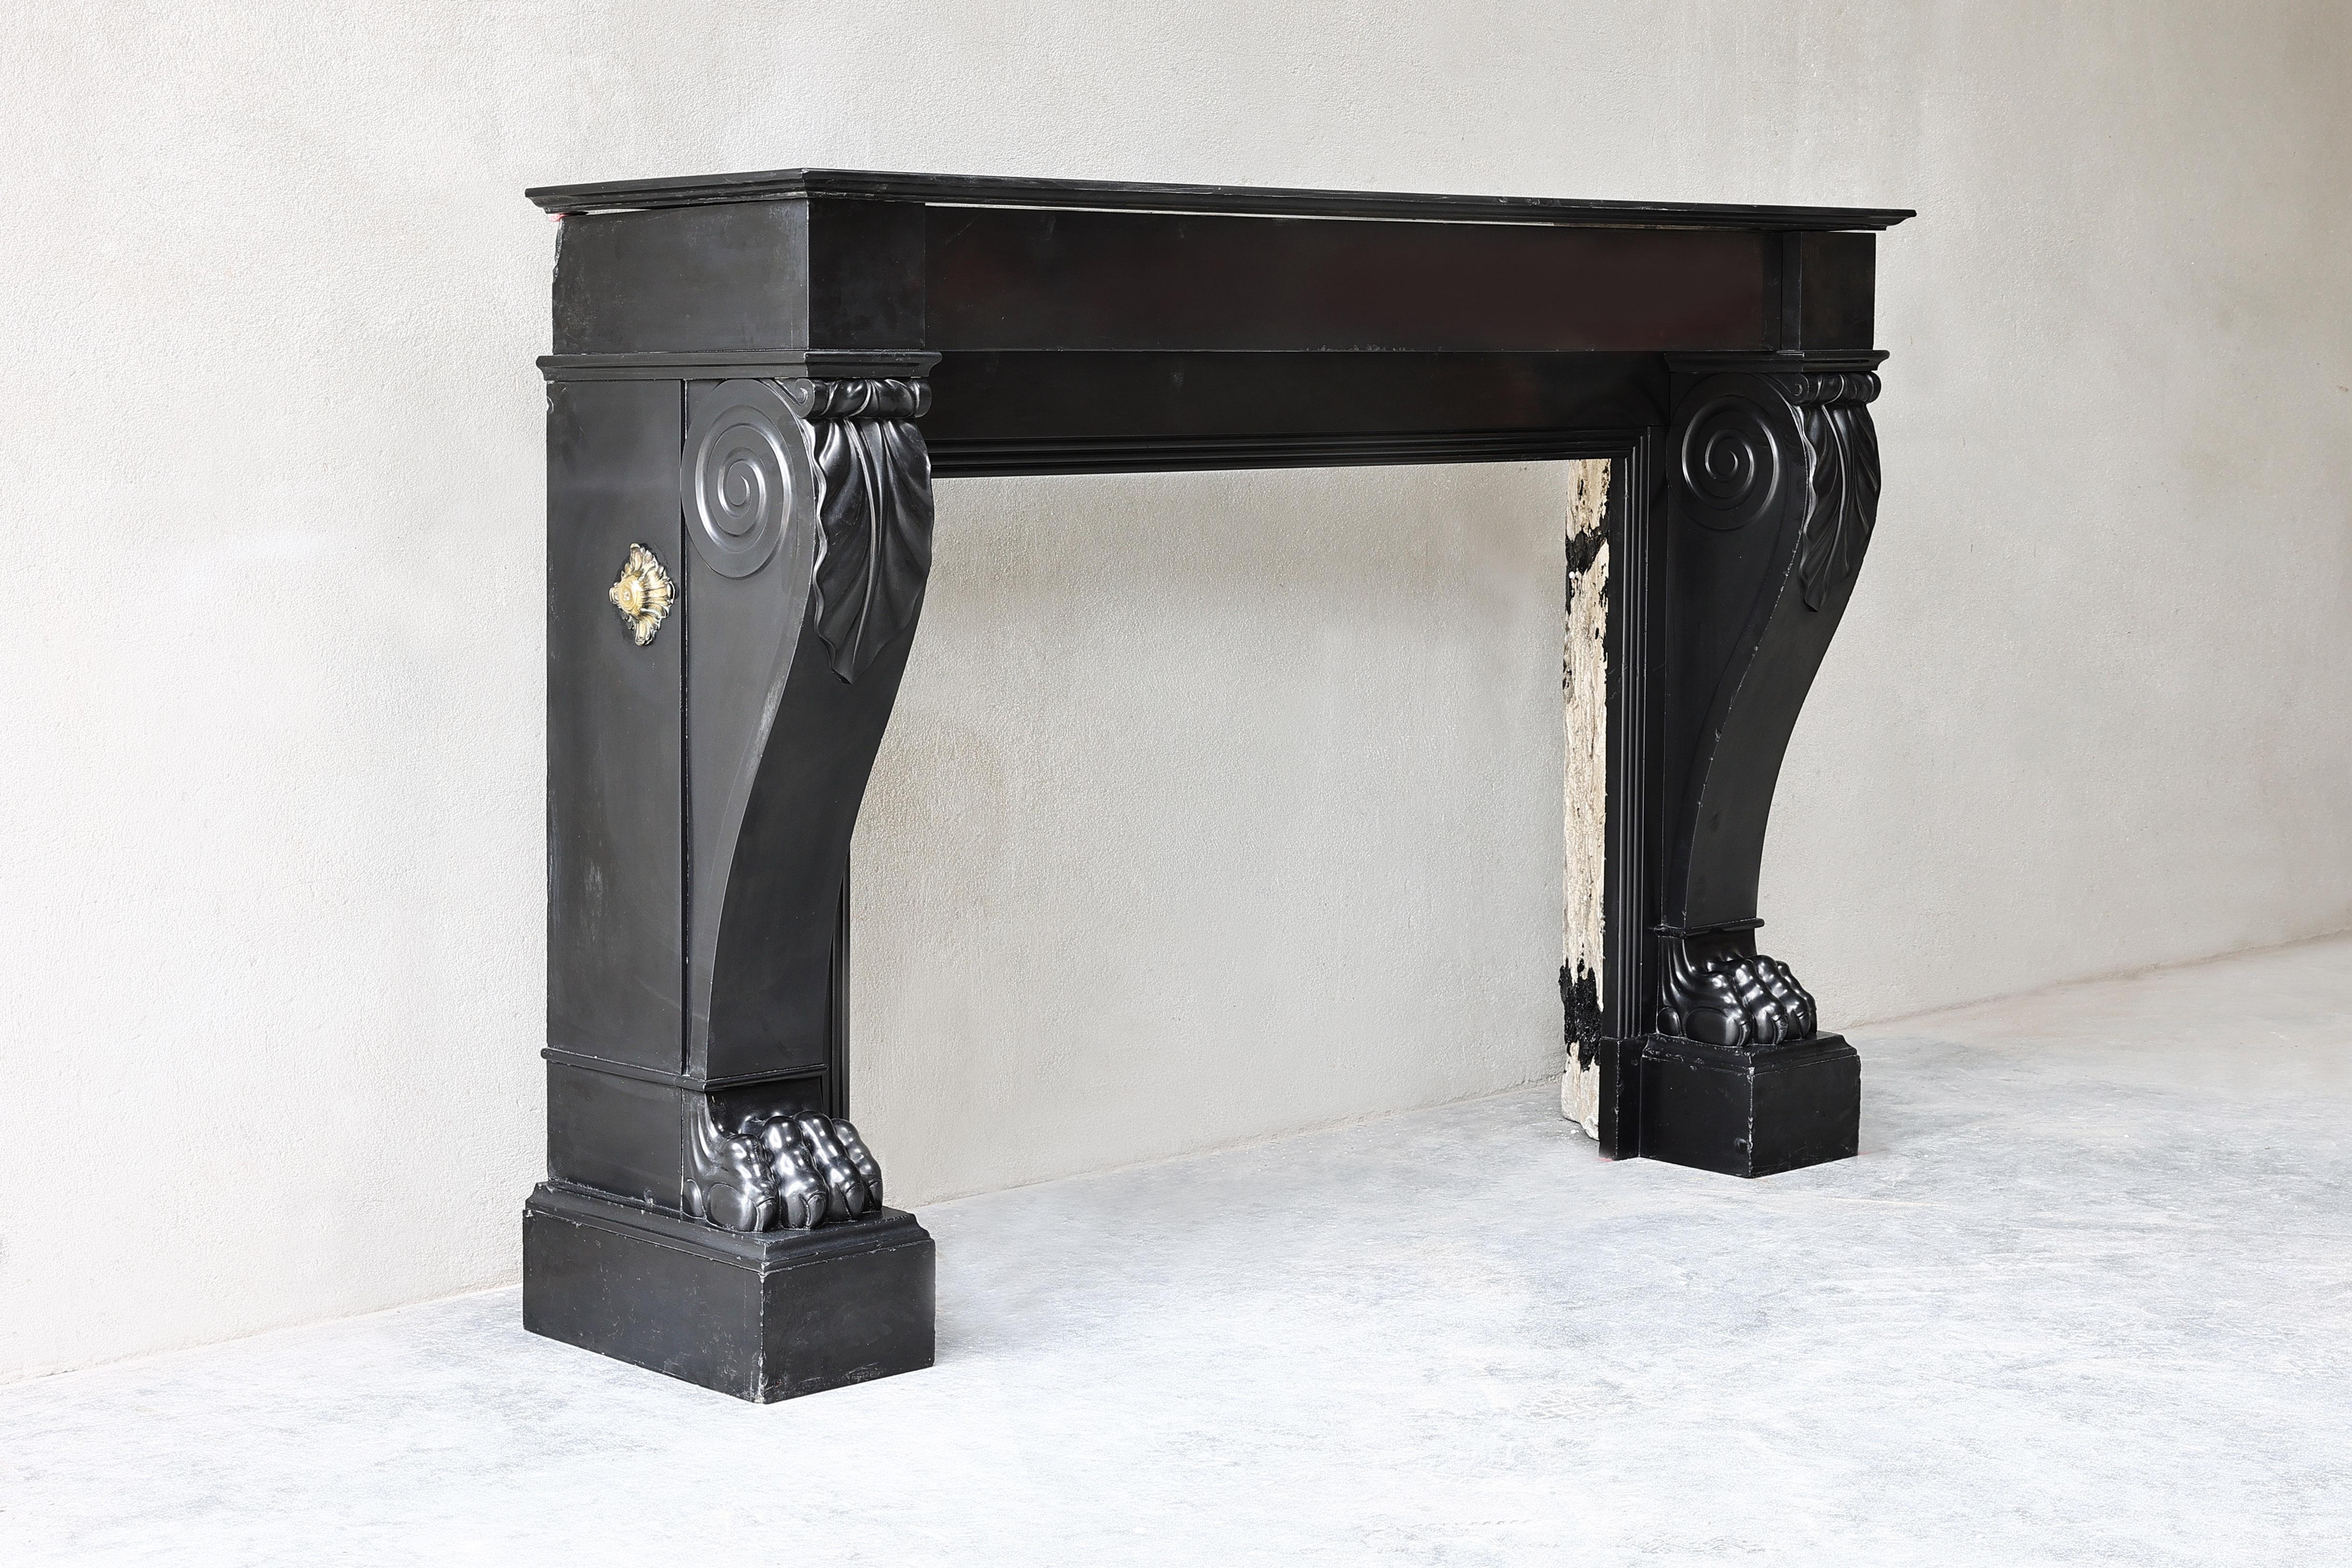 Beautiful antique fireplace of Noir de Mazy marble! Noir de Mazy marble is an exclusive black Belgian marble that comes from the quarries in Mazy - Belgium. The black marble is also named 